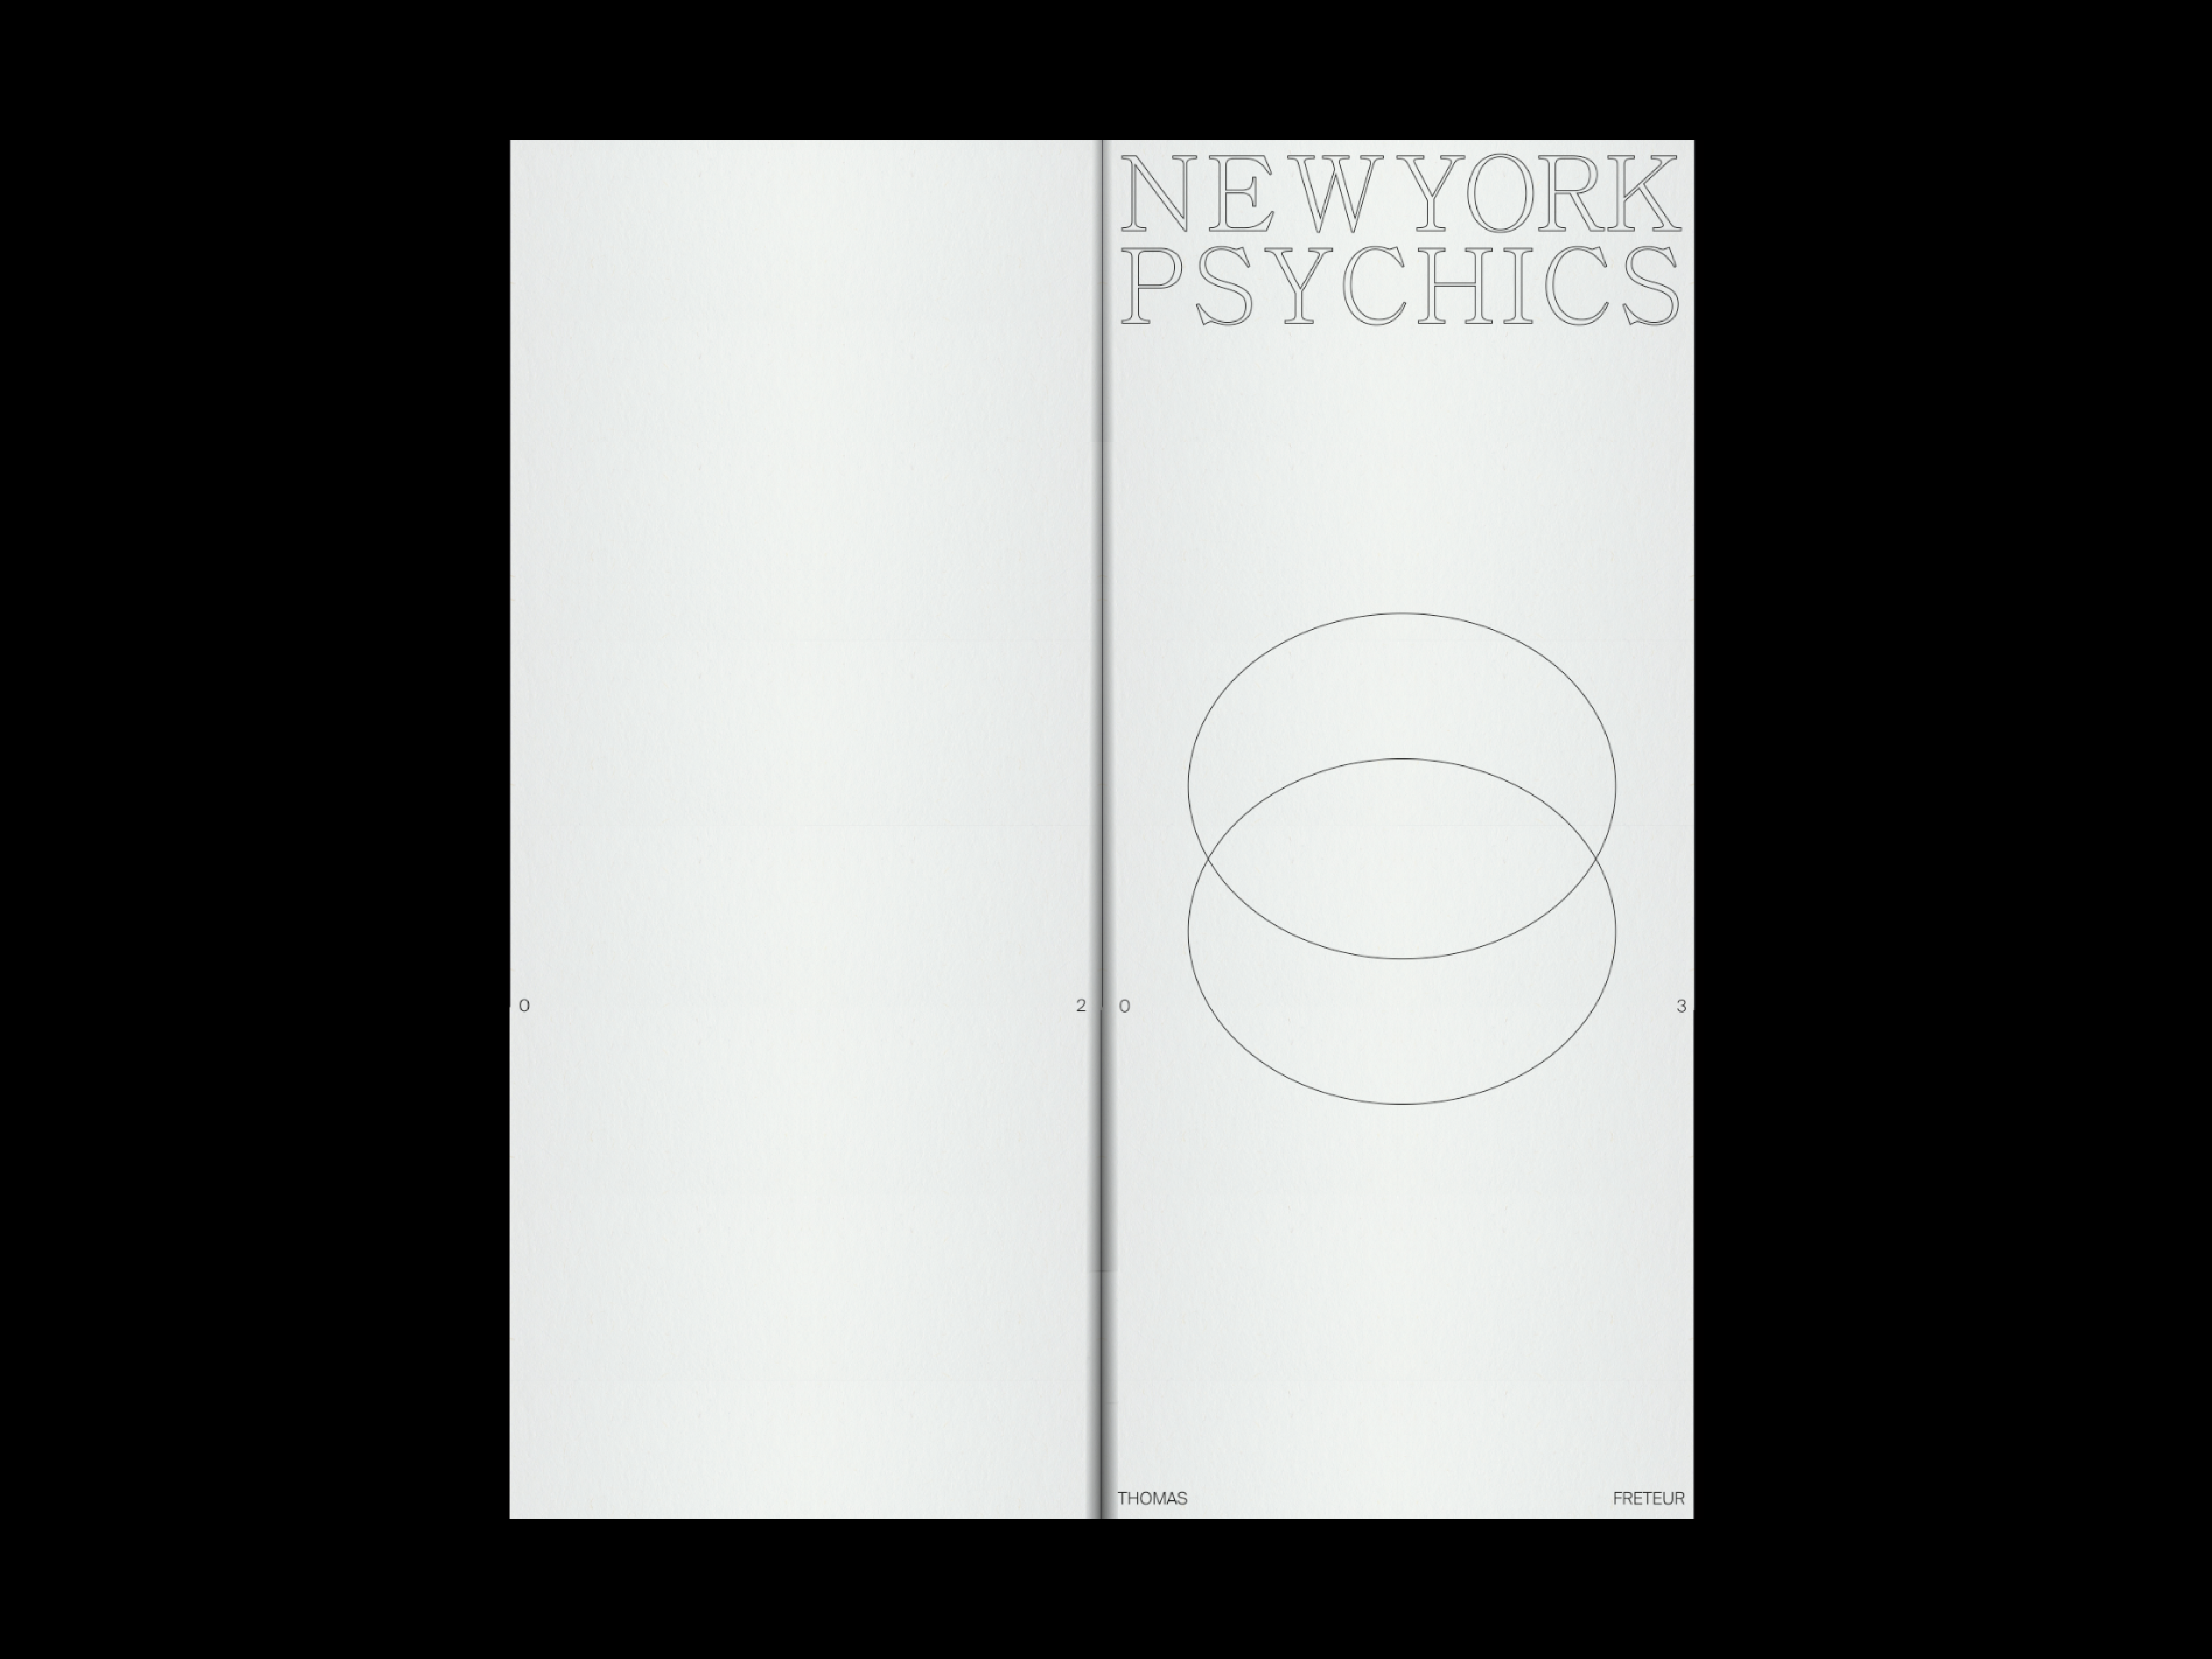 https://www.julienbaiamonte.com/content/1-projects/new-york-psychics/nyc_psychics_scan006_baiamonte_251019.png.png